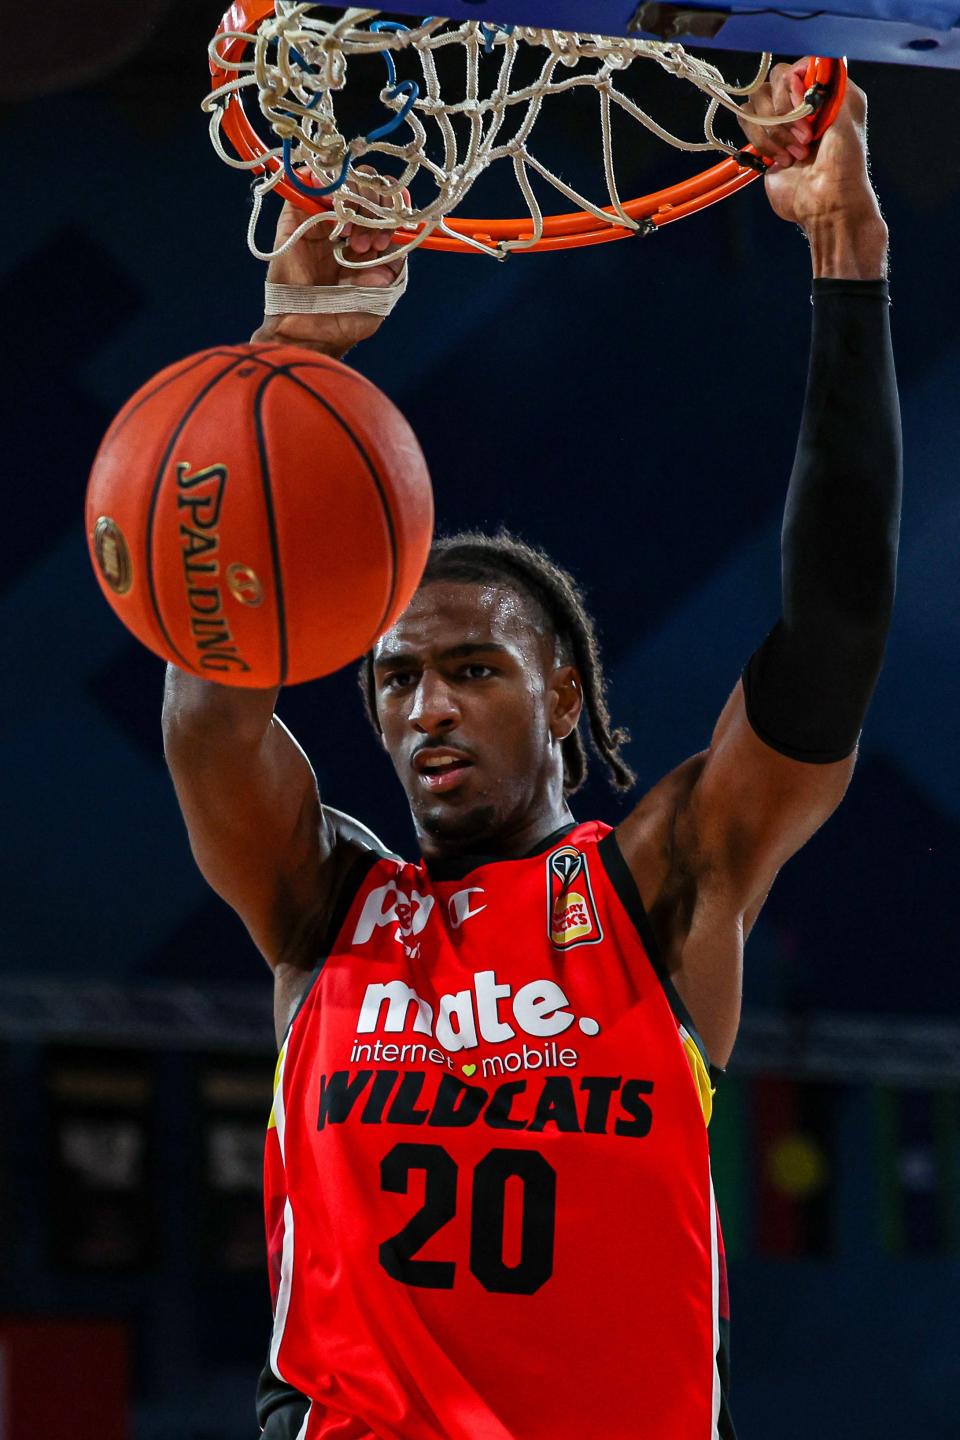 French player Alexandre Sarr of the Perth Wildcats is projected to be the No. 1 pick in the 2024 NBA draft in some NBA mock draft projections.